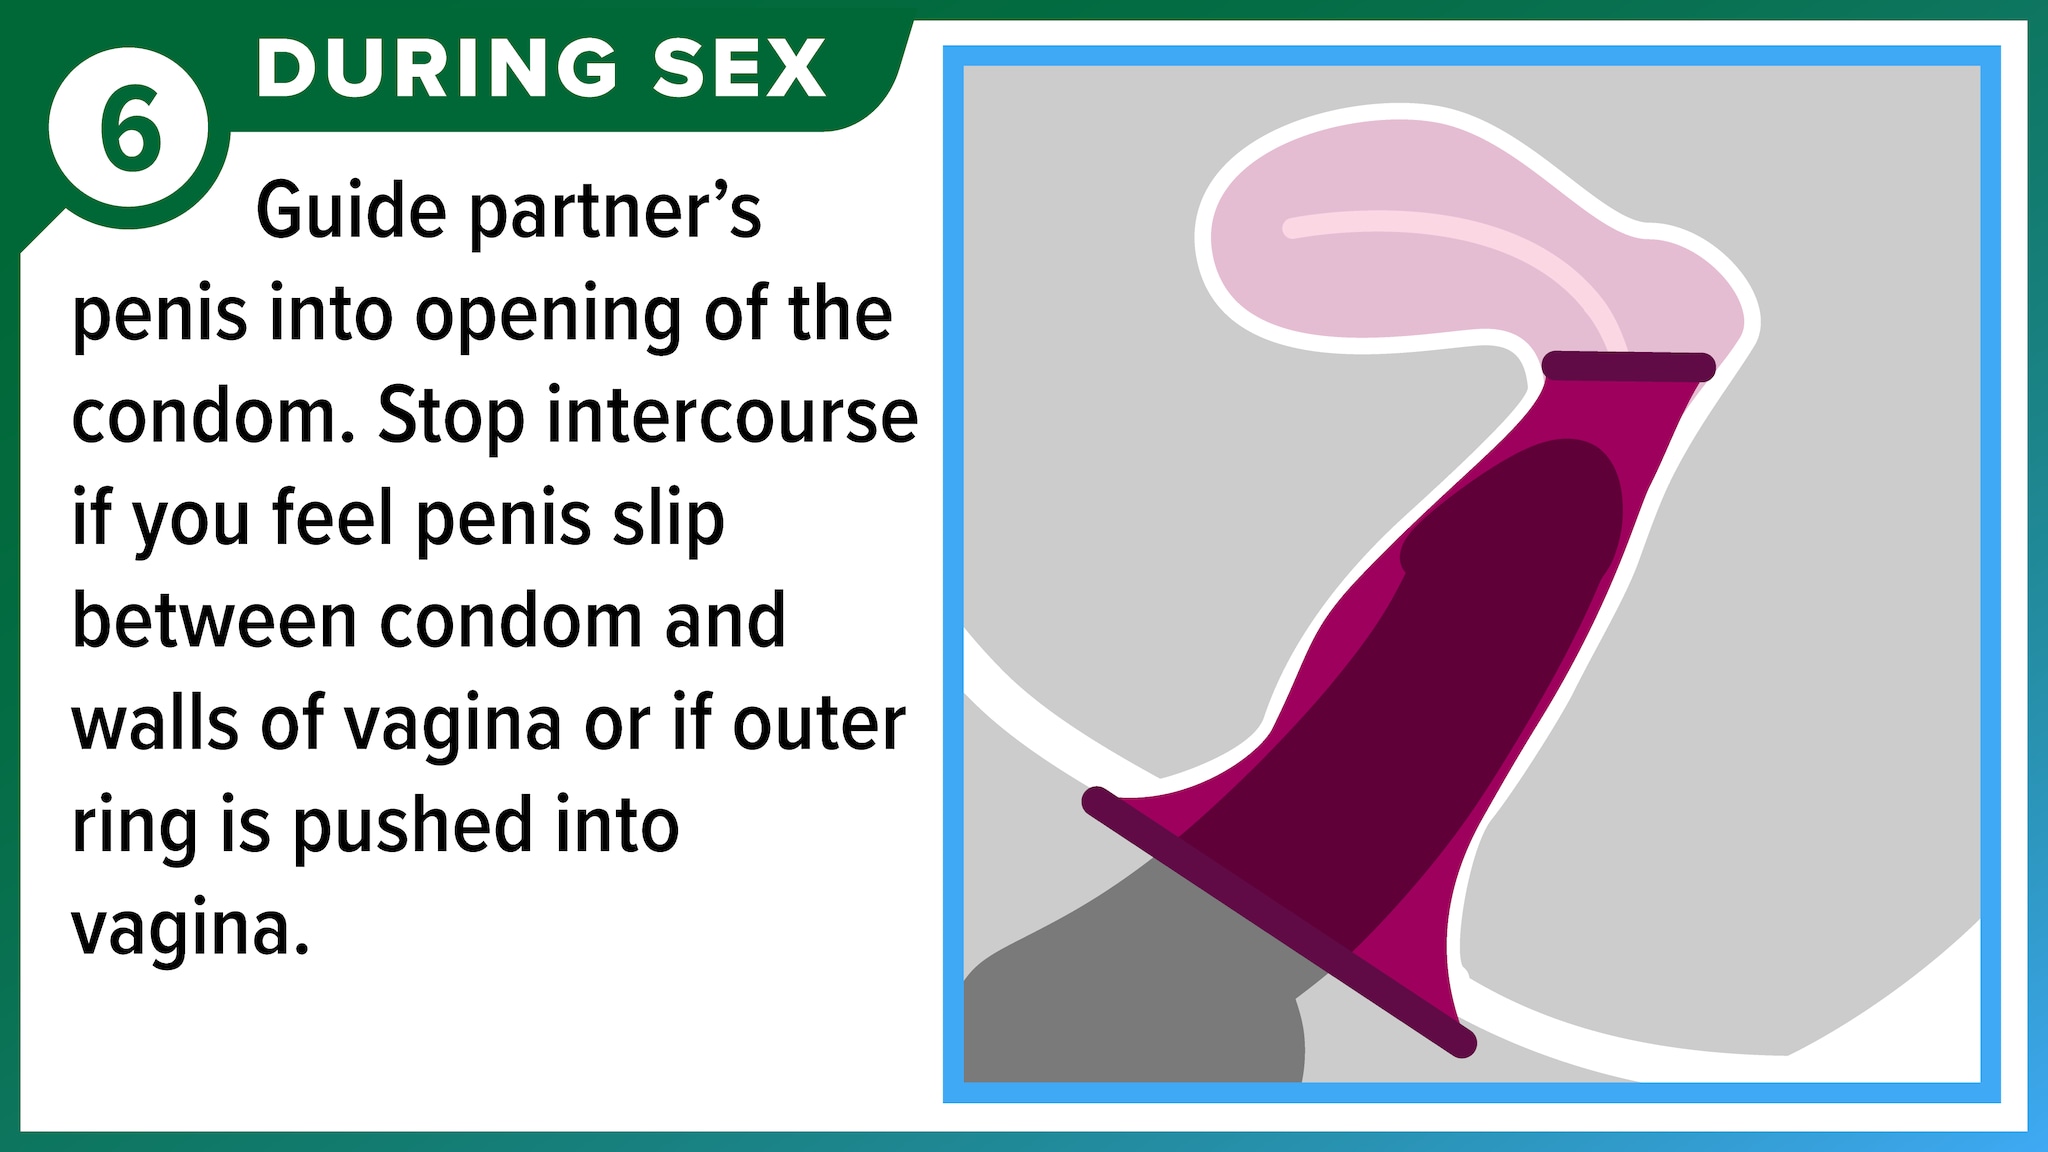 Female condom in place with penis inserted into vagina. During sex - Guide partner's penis into opening of the condom. Stop intercourse if you feel penis slip between condom and walls of vagina or if outer ring is pushed into vagina.